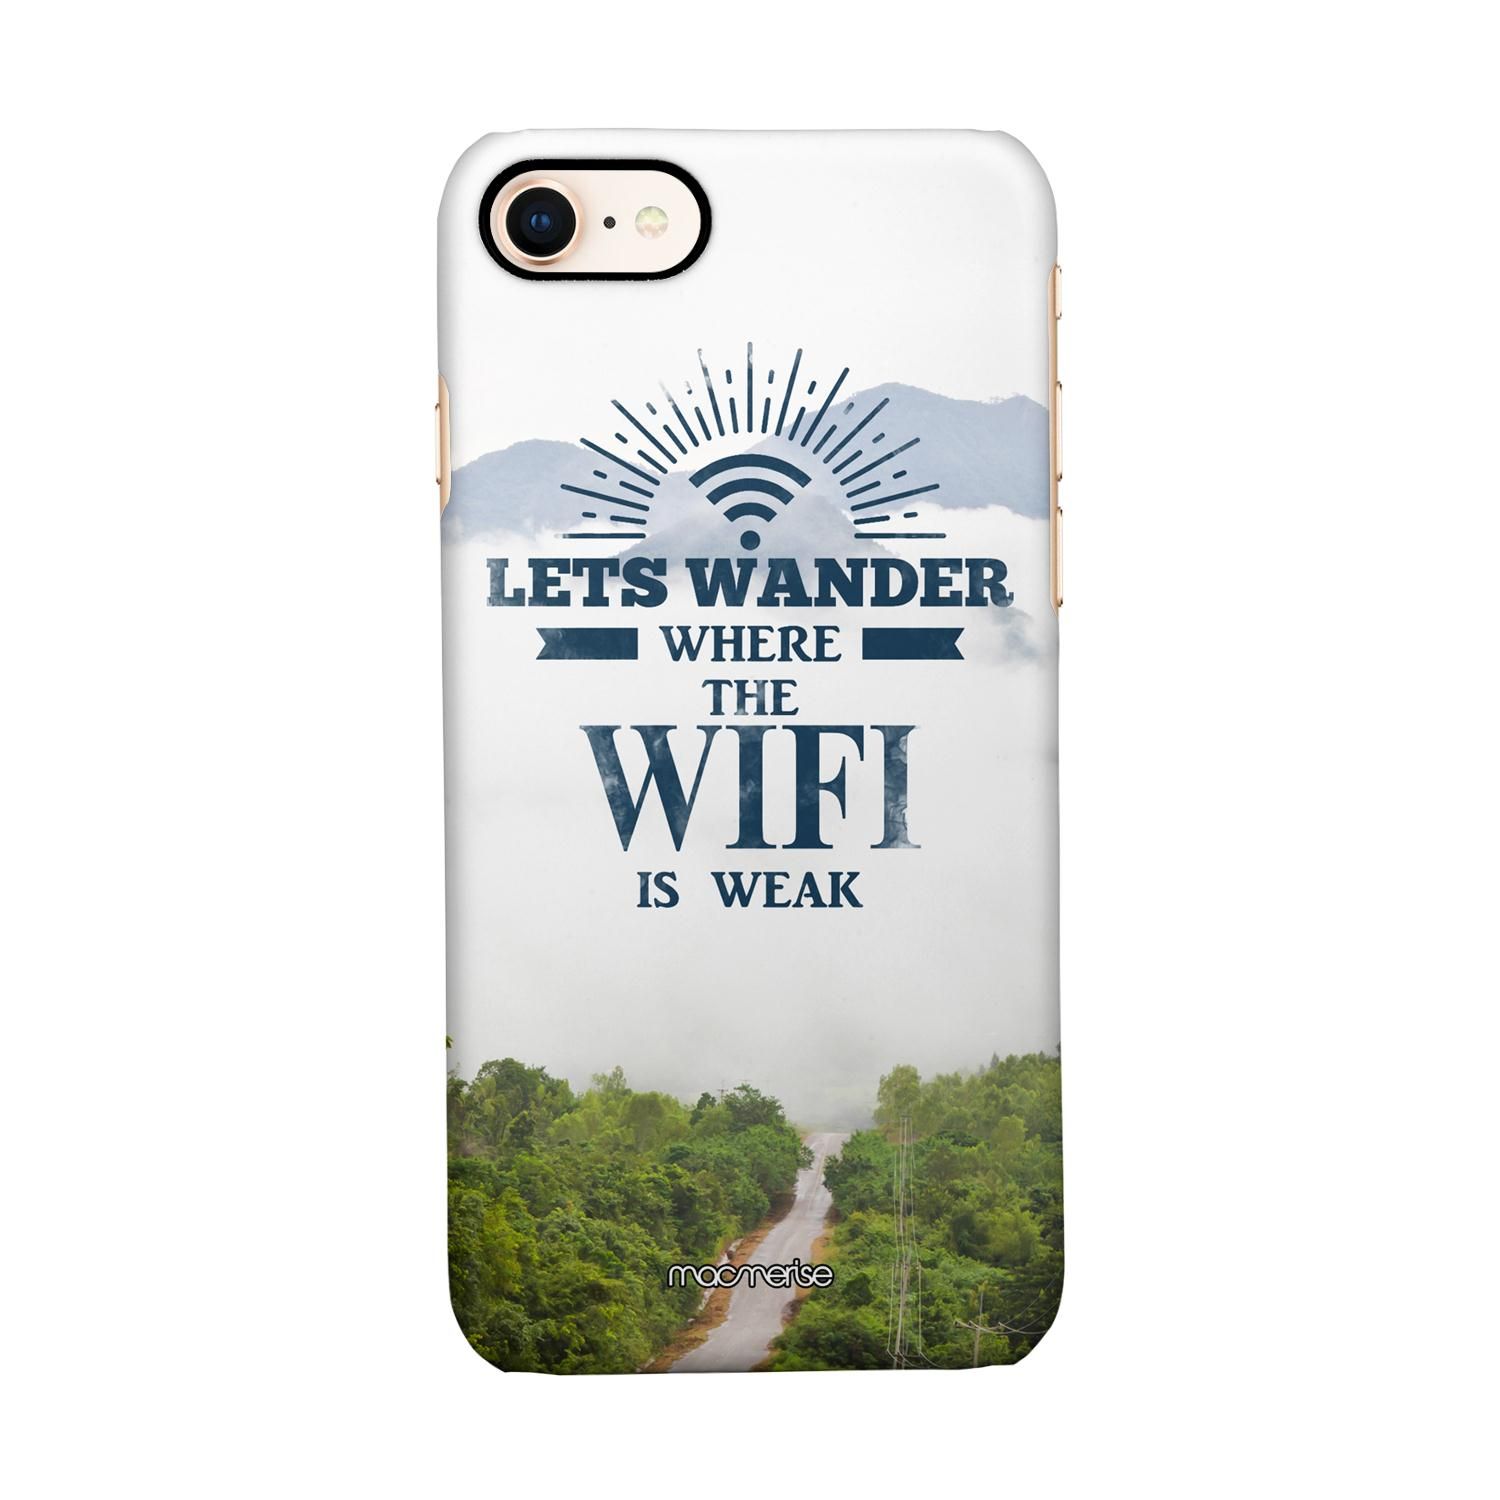 Buy Wander without Wifi - Sleek Phone Case for iPhone 7 Online